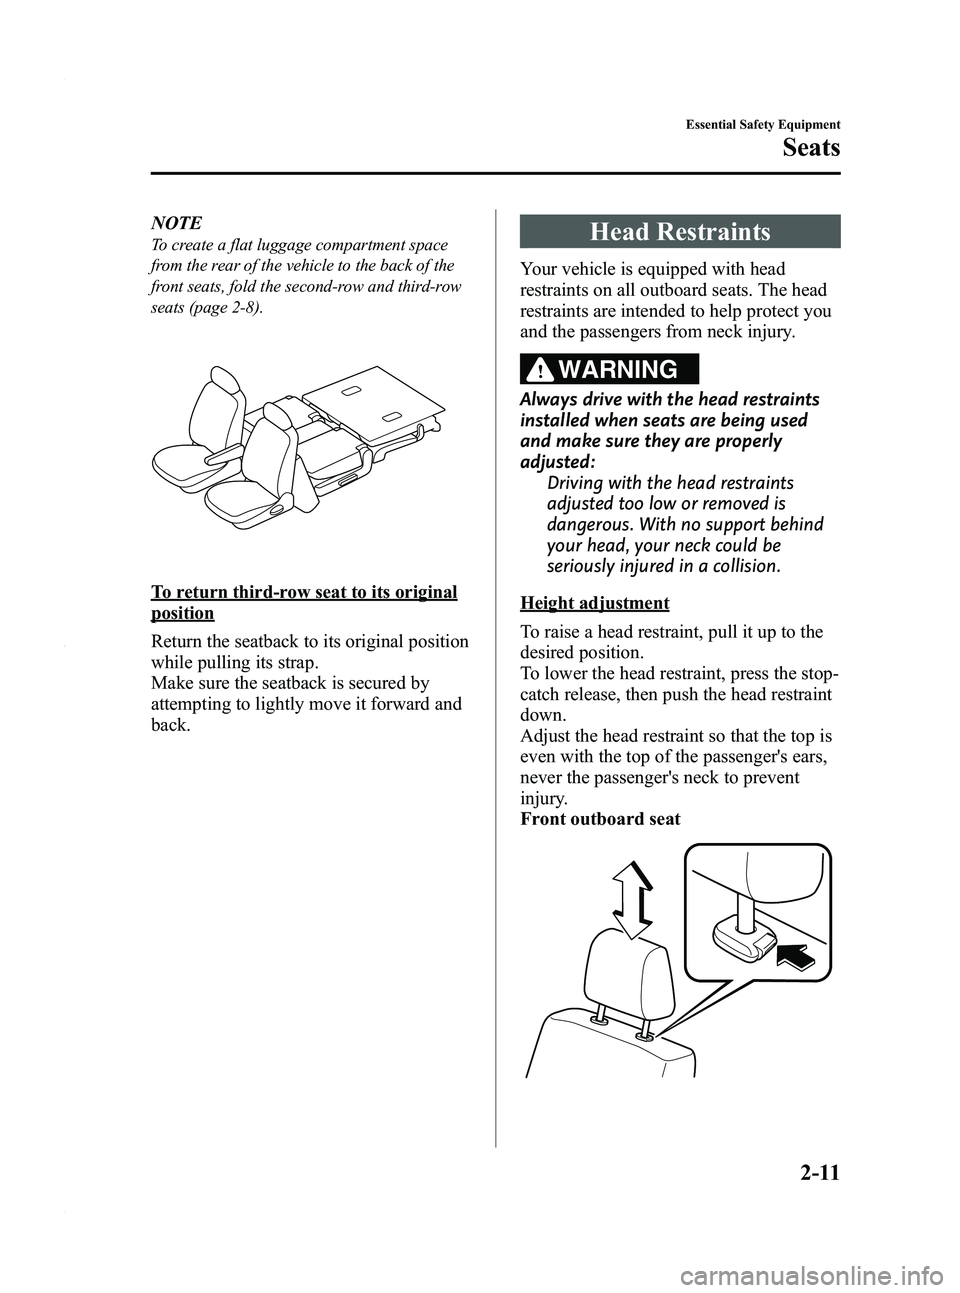 MAZDA MODEL 5 2010  Owners Manual Black plate (23,1)
NOTE
To create a flat luggage compartment space
from the rear of the vehicle to the back of the
front seats, fold the second-row and third-row
seats (page 2-8).
To return third-row 